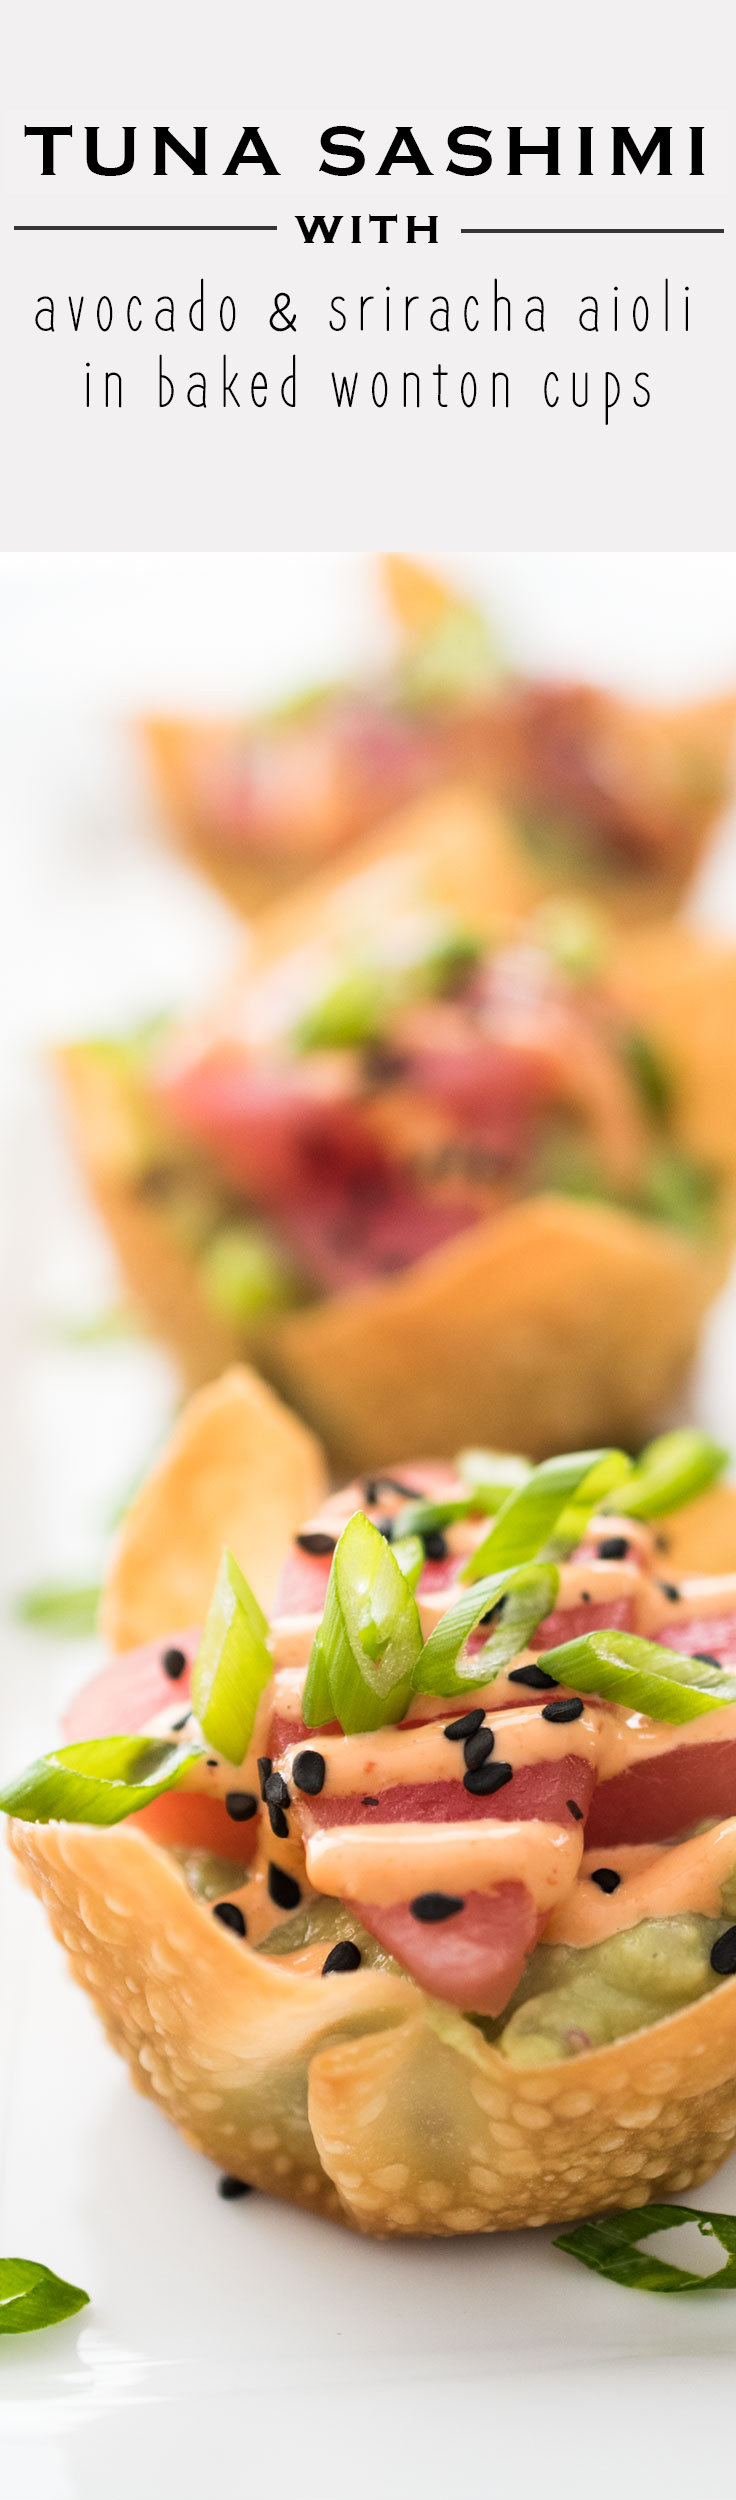 Got 10 minutes? That's all you need to make Tuna Sashimi and Avocado Wonton Cups. Perfect for parties and impromptu get togethers.